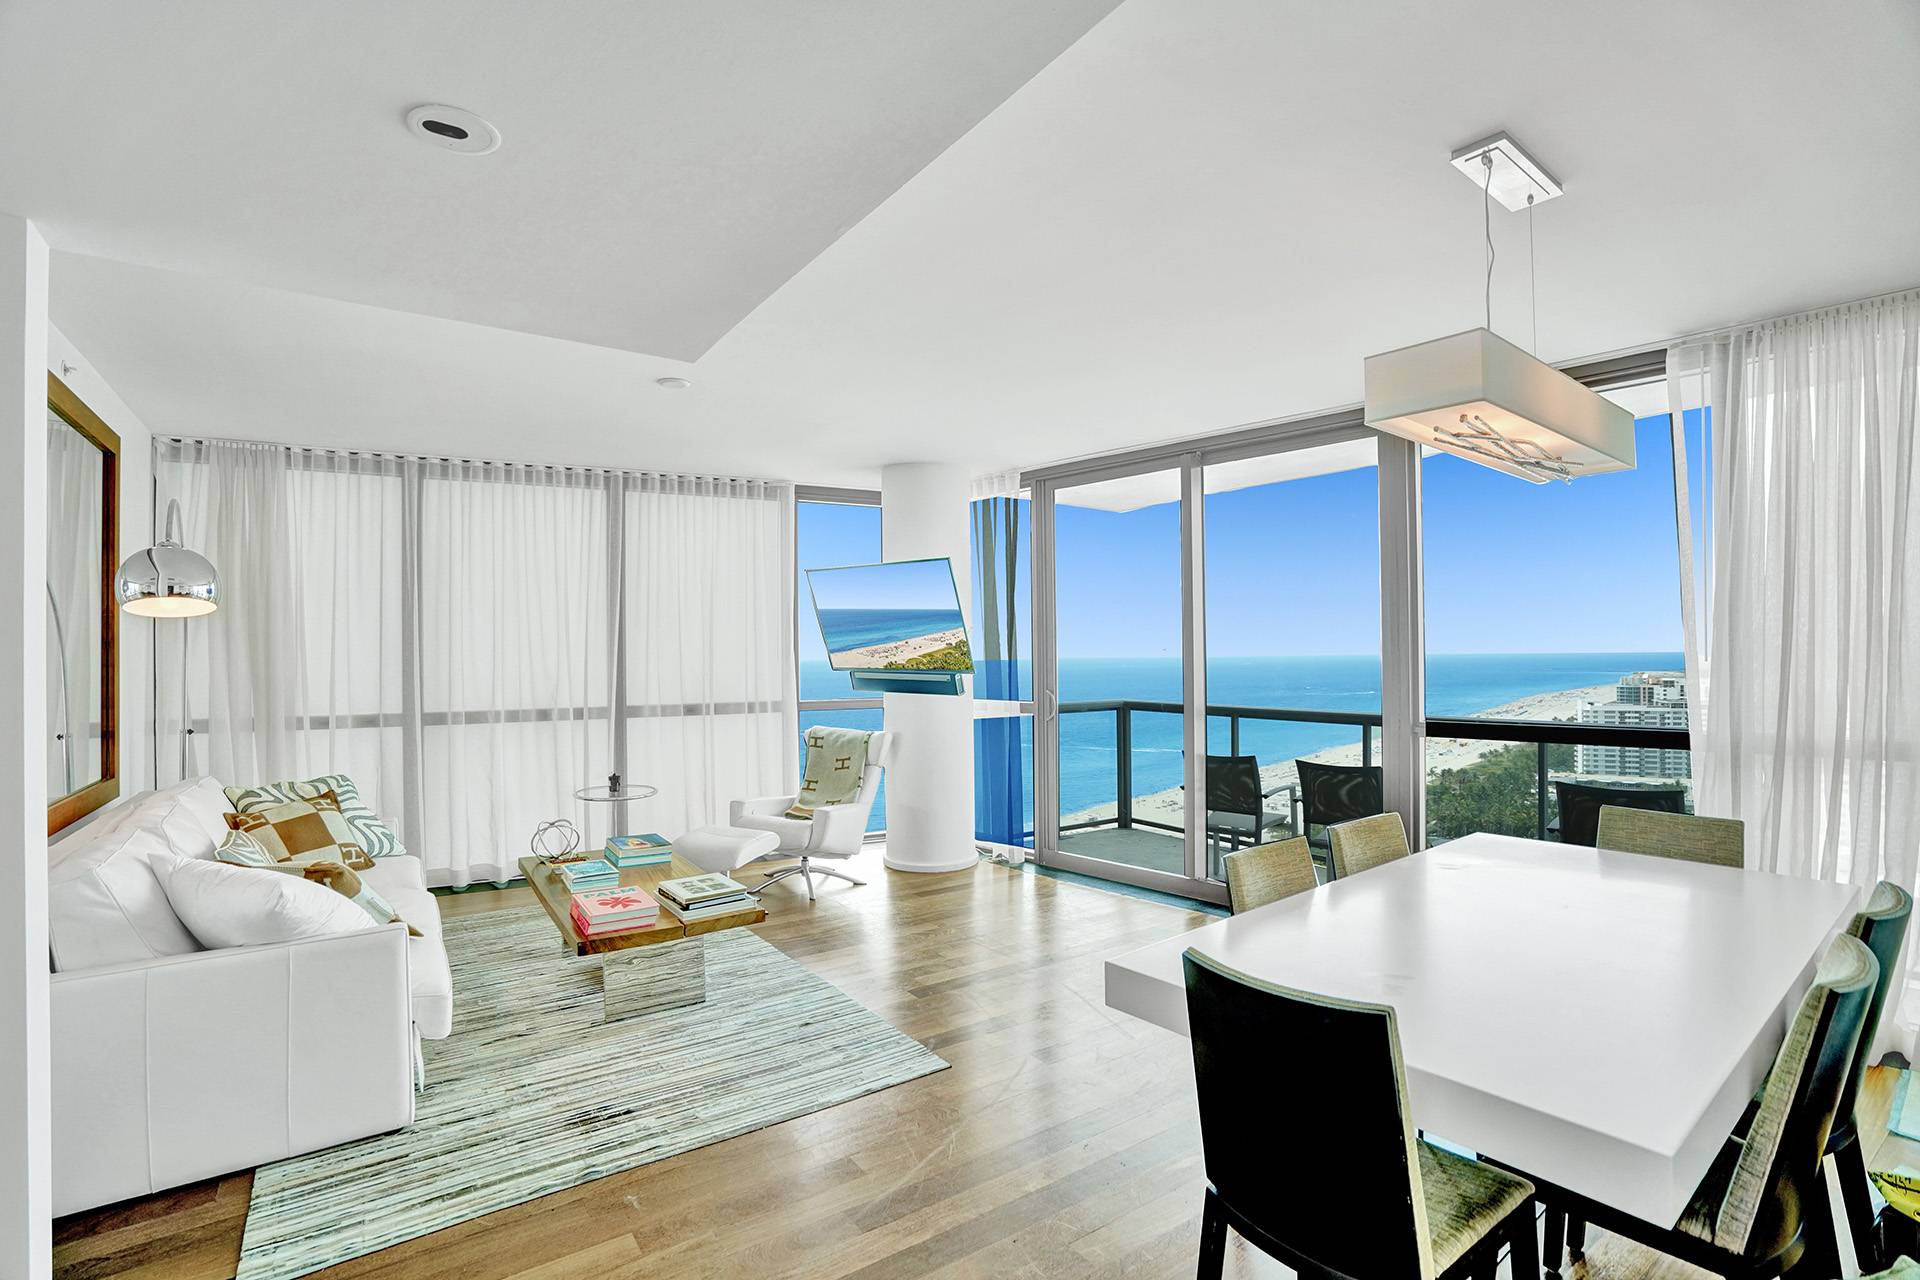 Ocean View 2 bed/2 bath unit at ultra-luxury Setai Residences in South Beach